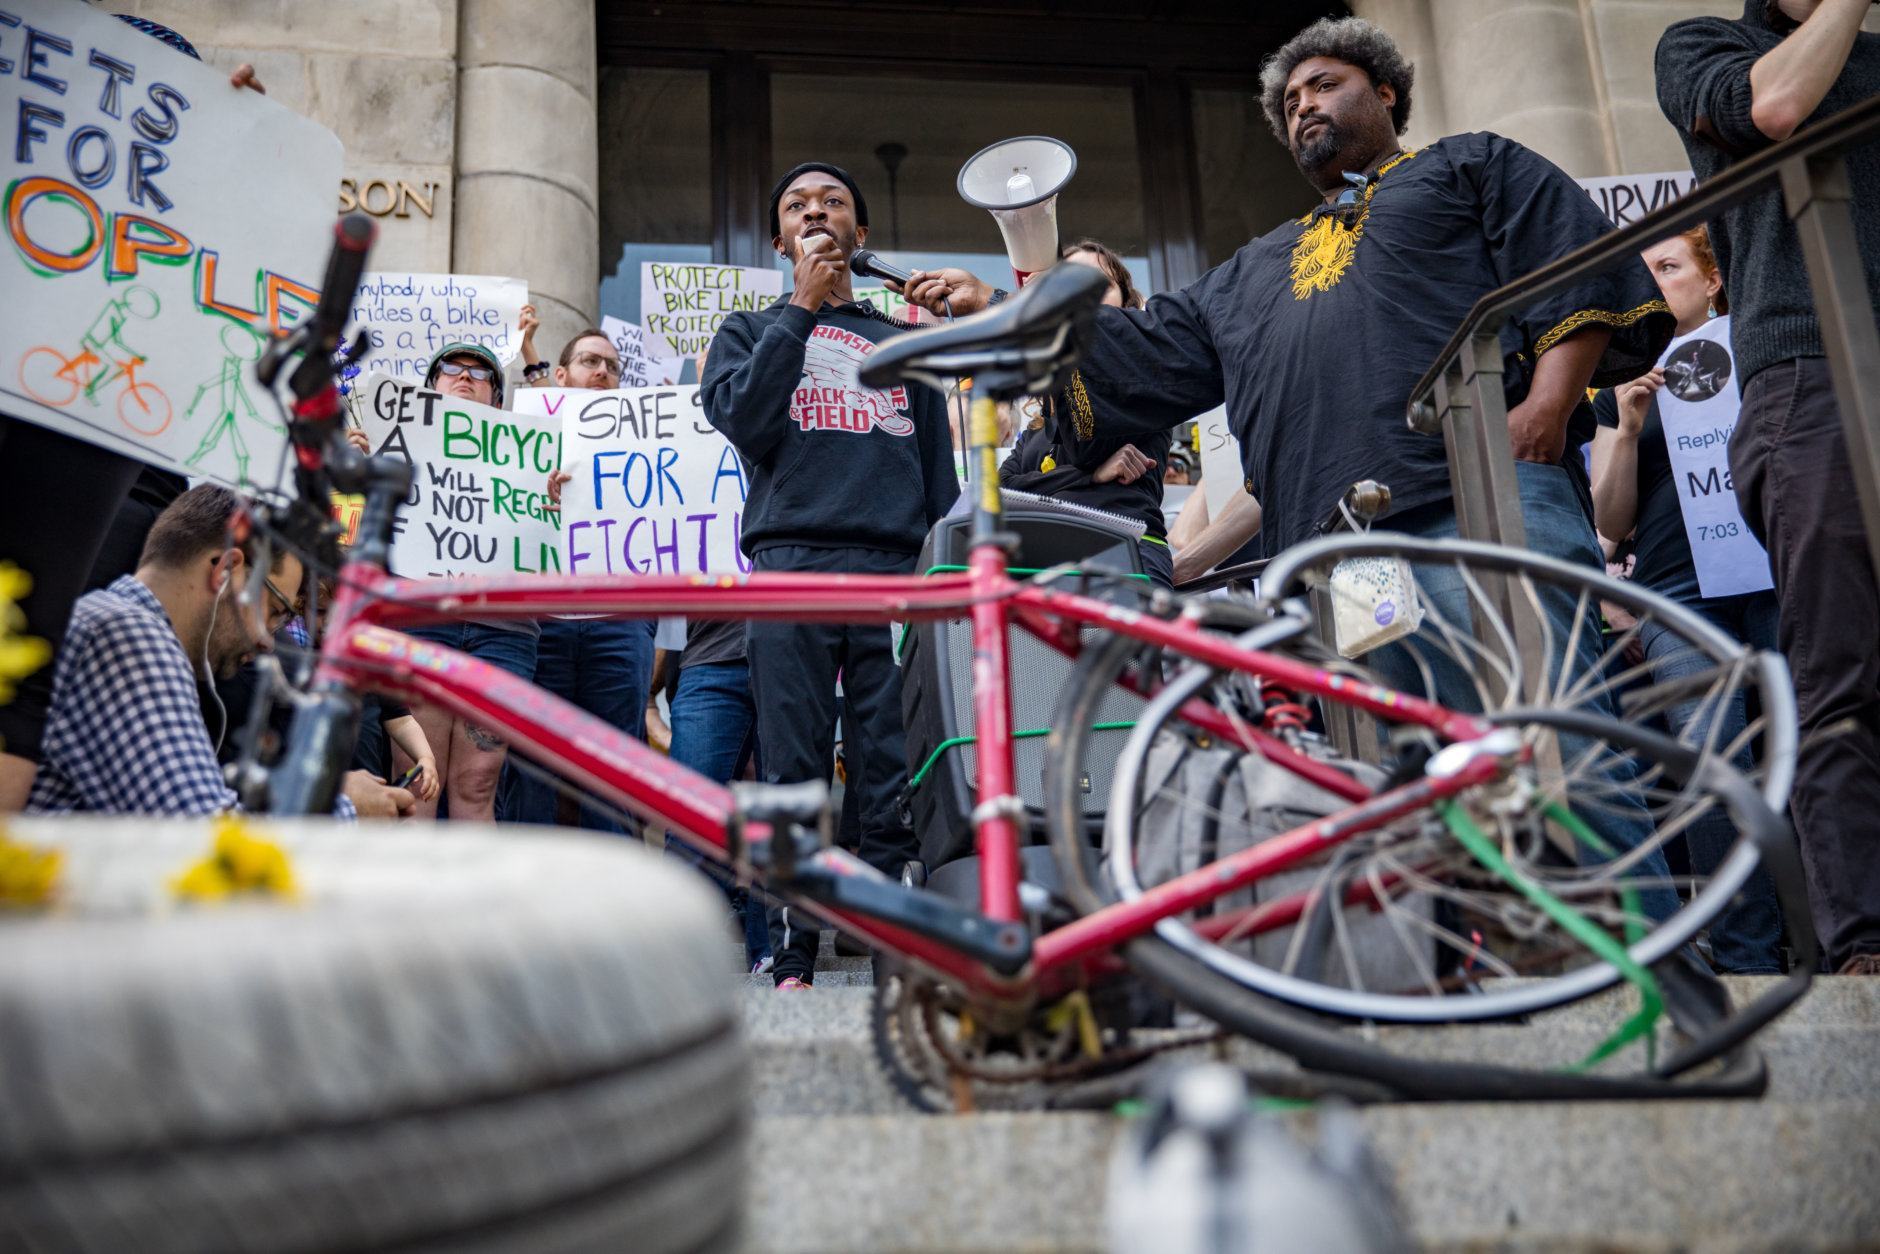 Families attend the protest for safer streets in DC outside the Wilson Building on Friday. The protest was sparked by recent deaths including that of Abdul Seck in SE DC and Dave Salovesh in NE D.C. (Courtesy Aimee Custis/Aimee Custis Photography)